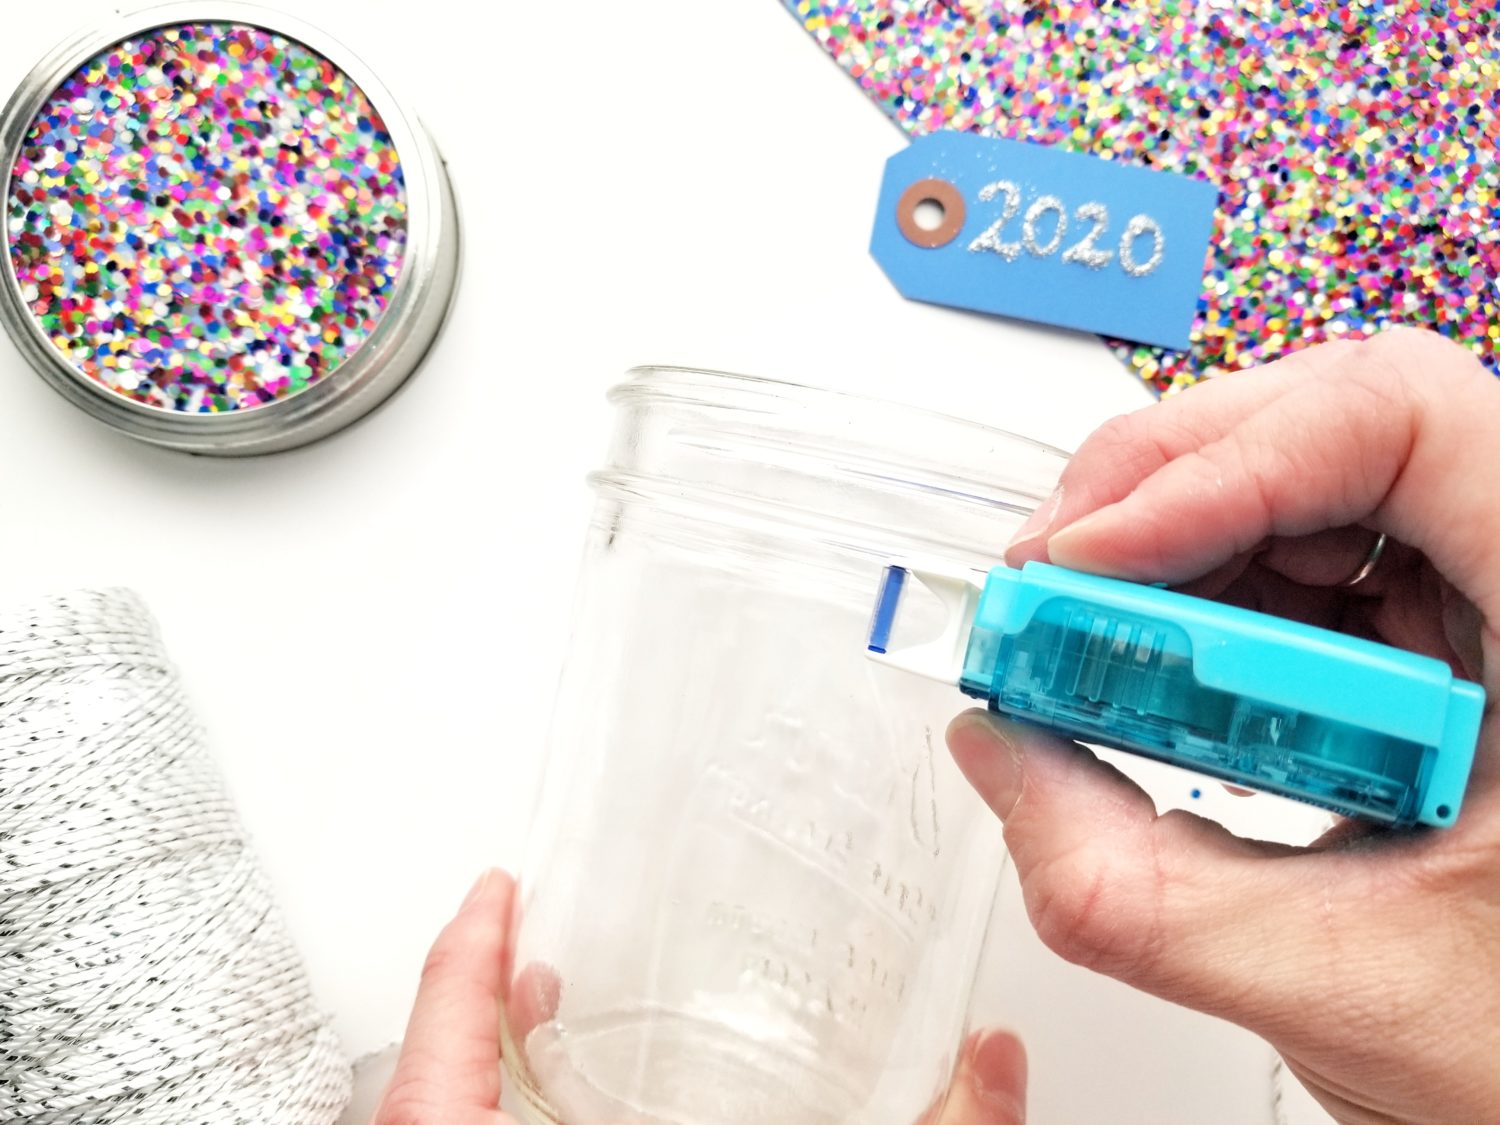 Create a gratitude jar with @graceannestudio, and ring in 2020 with a fresh perspective! @tombowusa